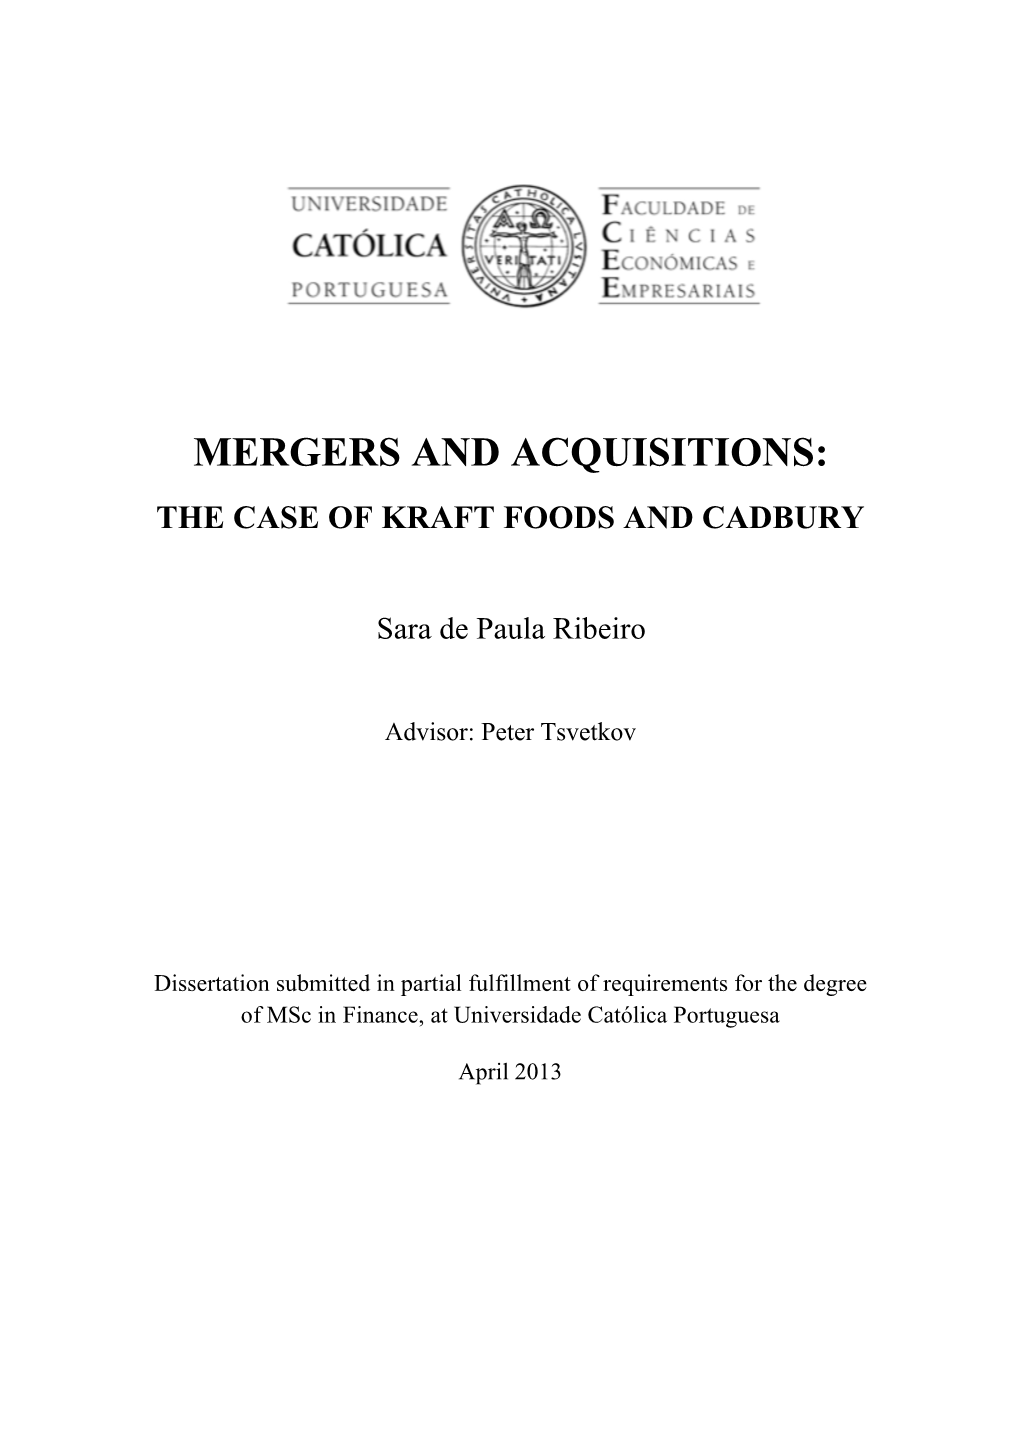 Mergers and Acquisitions: the Case of Kraft Foods and Cadbury